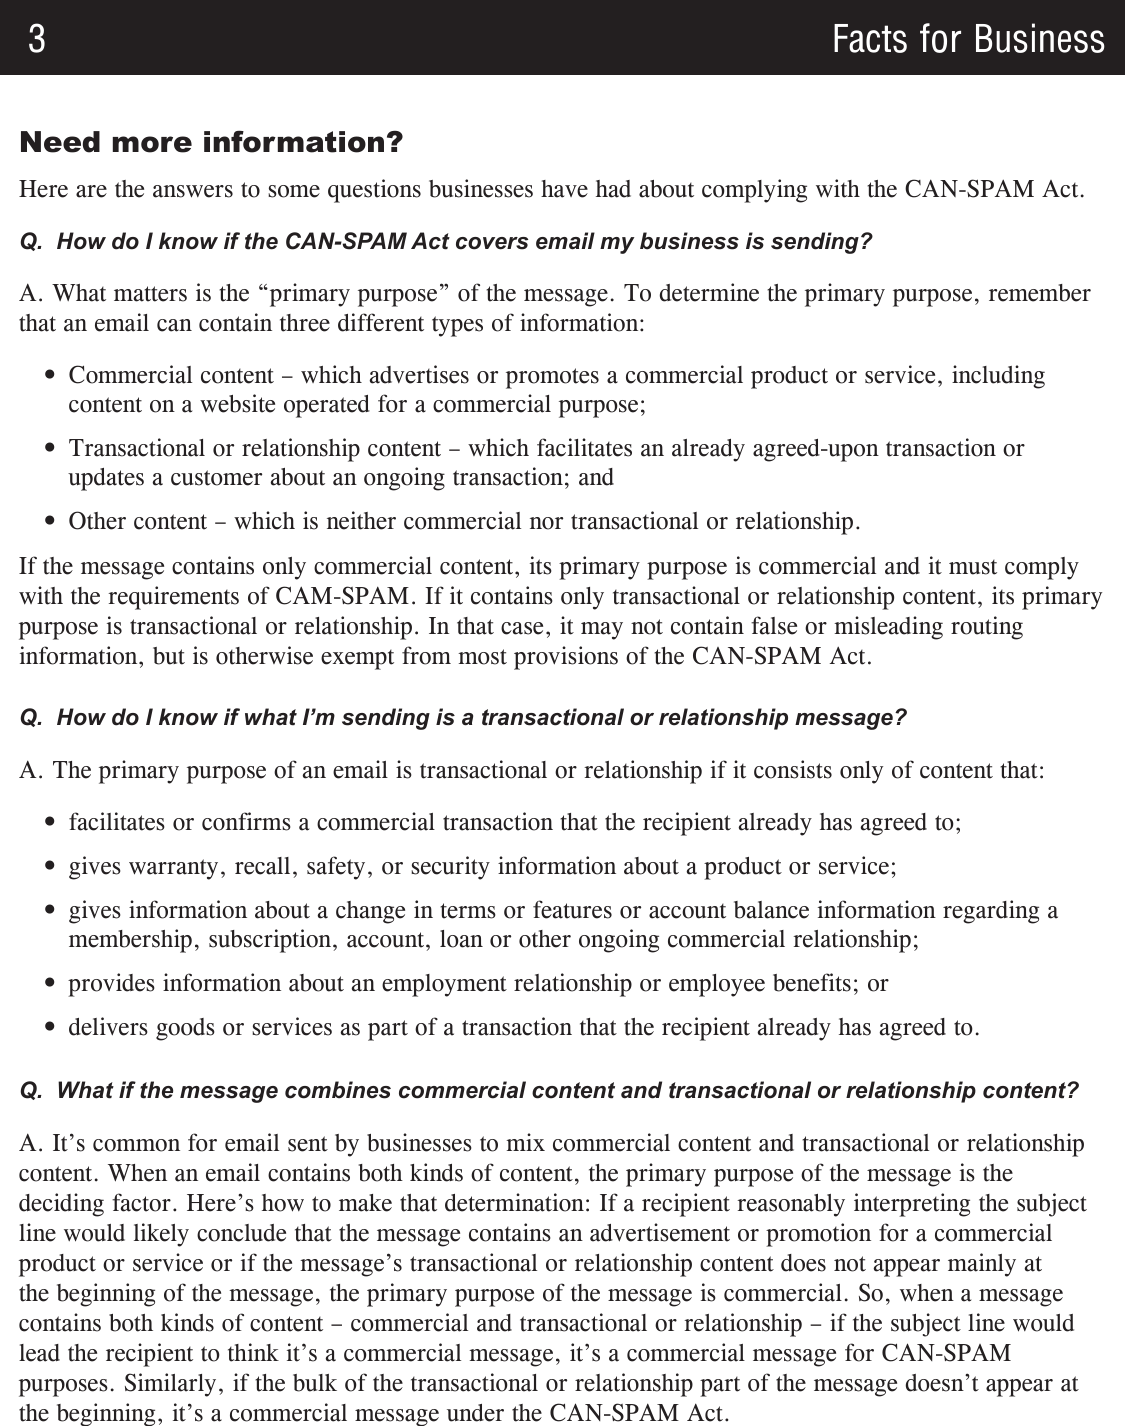 Page 3 of 6 - The CAN-SPAM Act: A Compliance Guide For Business PE Bus61-can-spam-act-compliance-guide-business